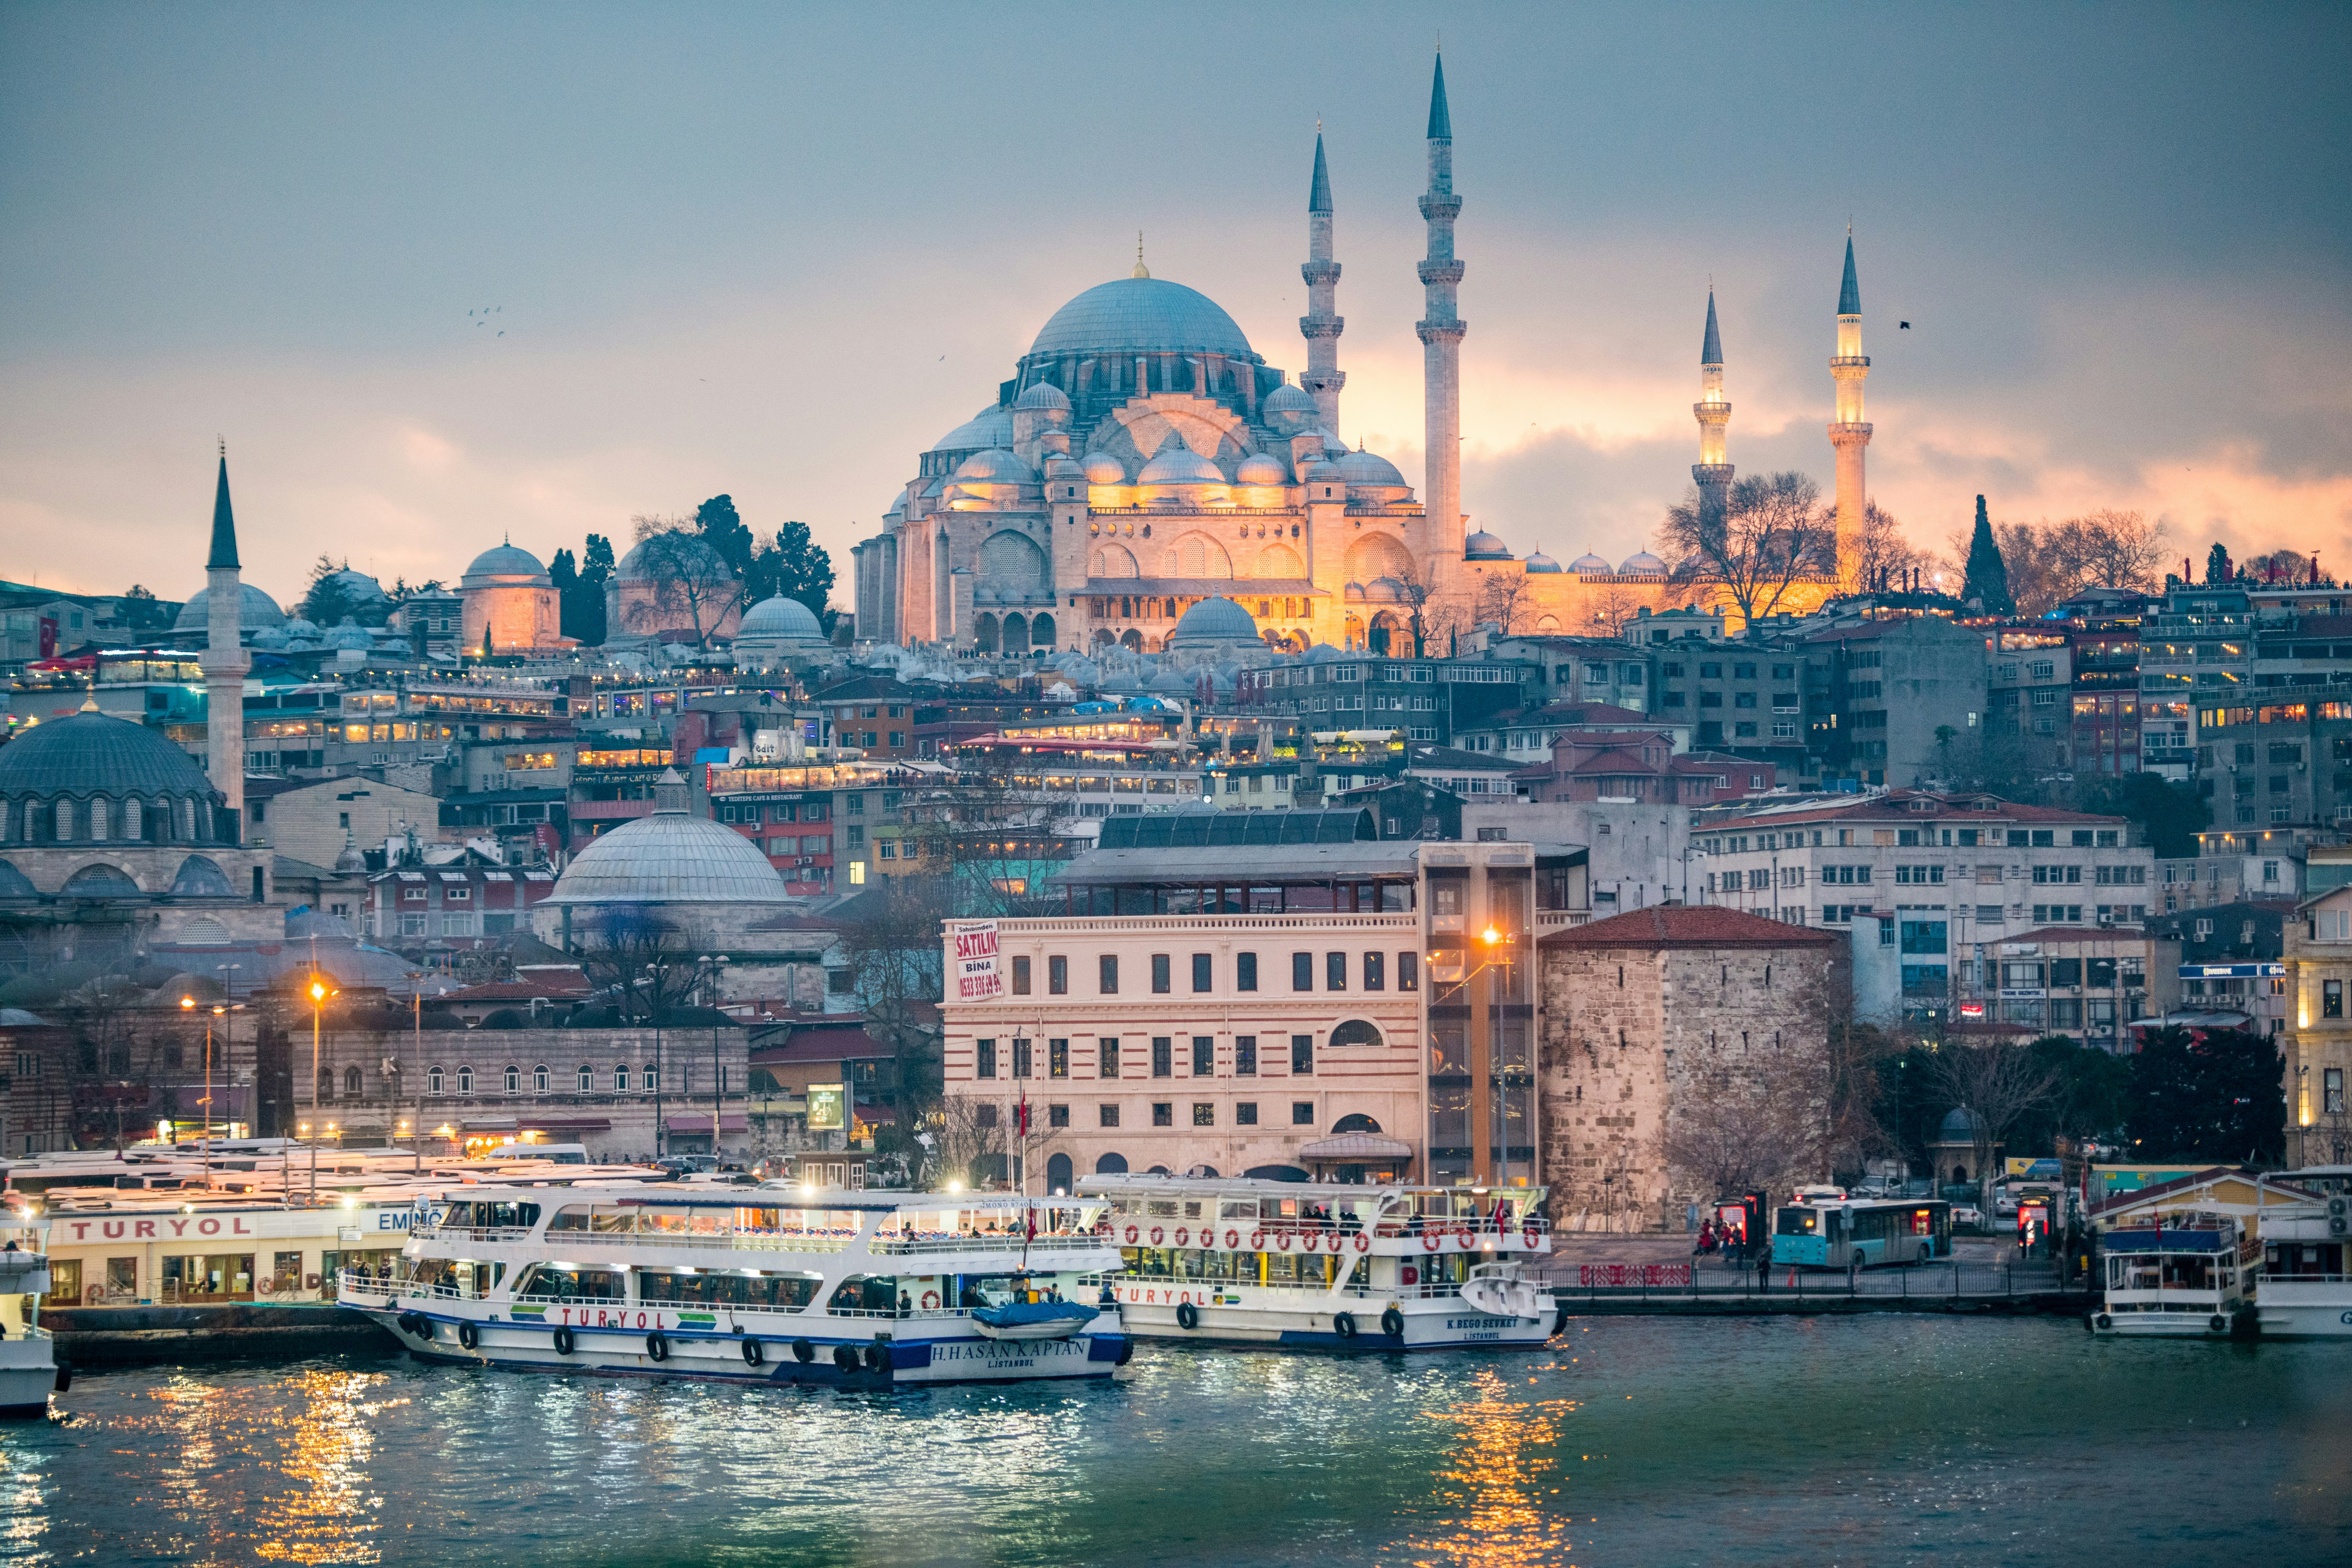 The glowing Süleymaniye Mosque sits on top of a hill overlooking the the city of Istanbul, Turkey, as street lights begin to illuminate the twilight skies. In front, a series of boats are visible.